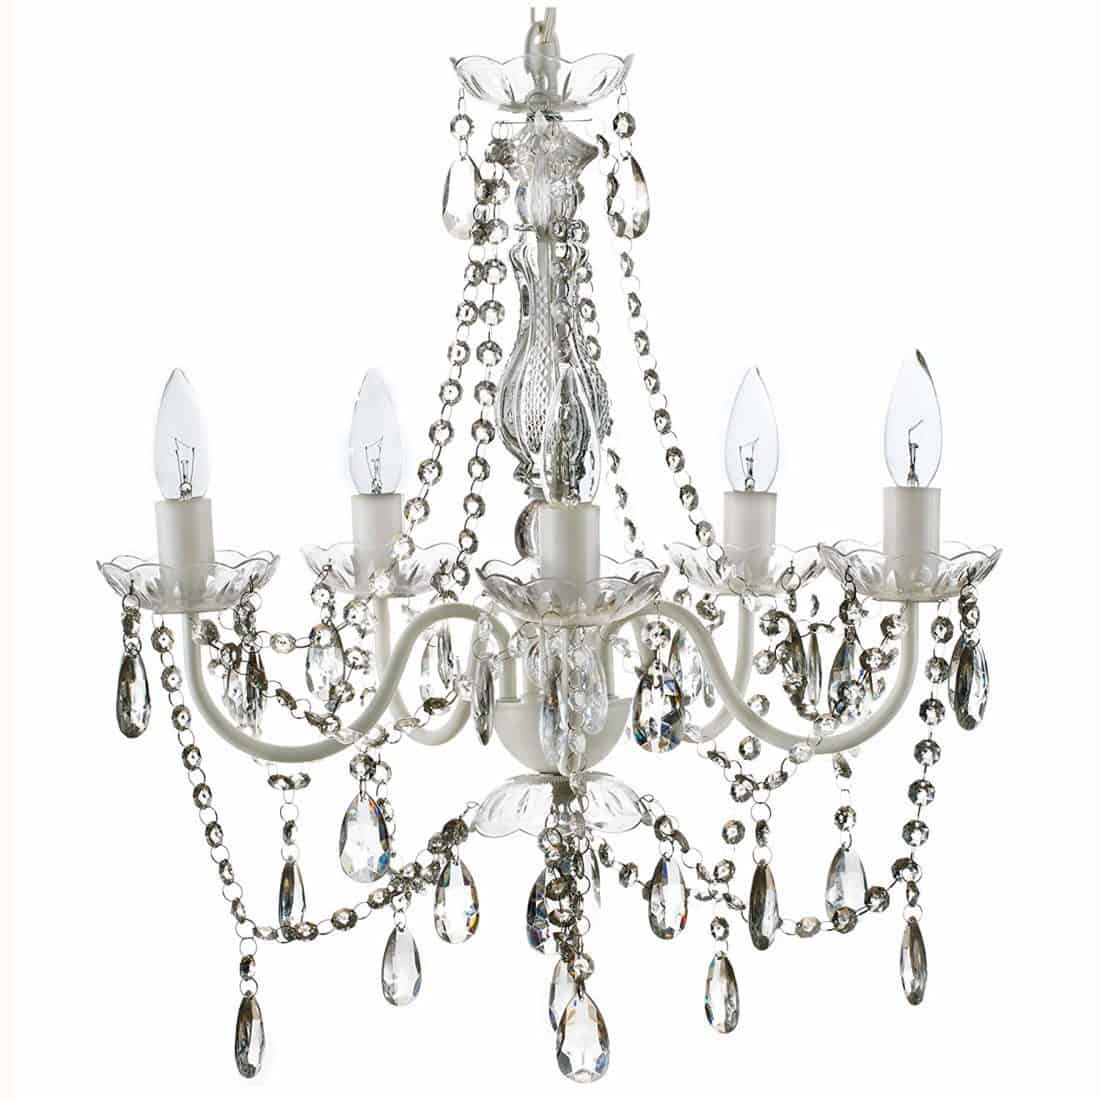 How to Find The Perfect Chandelier and Get It On Sale